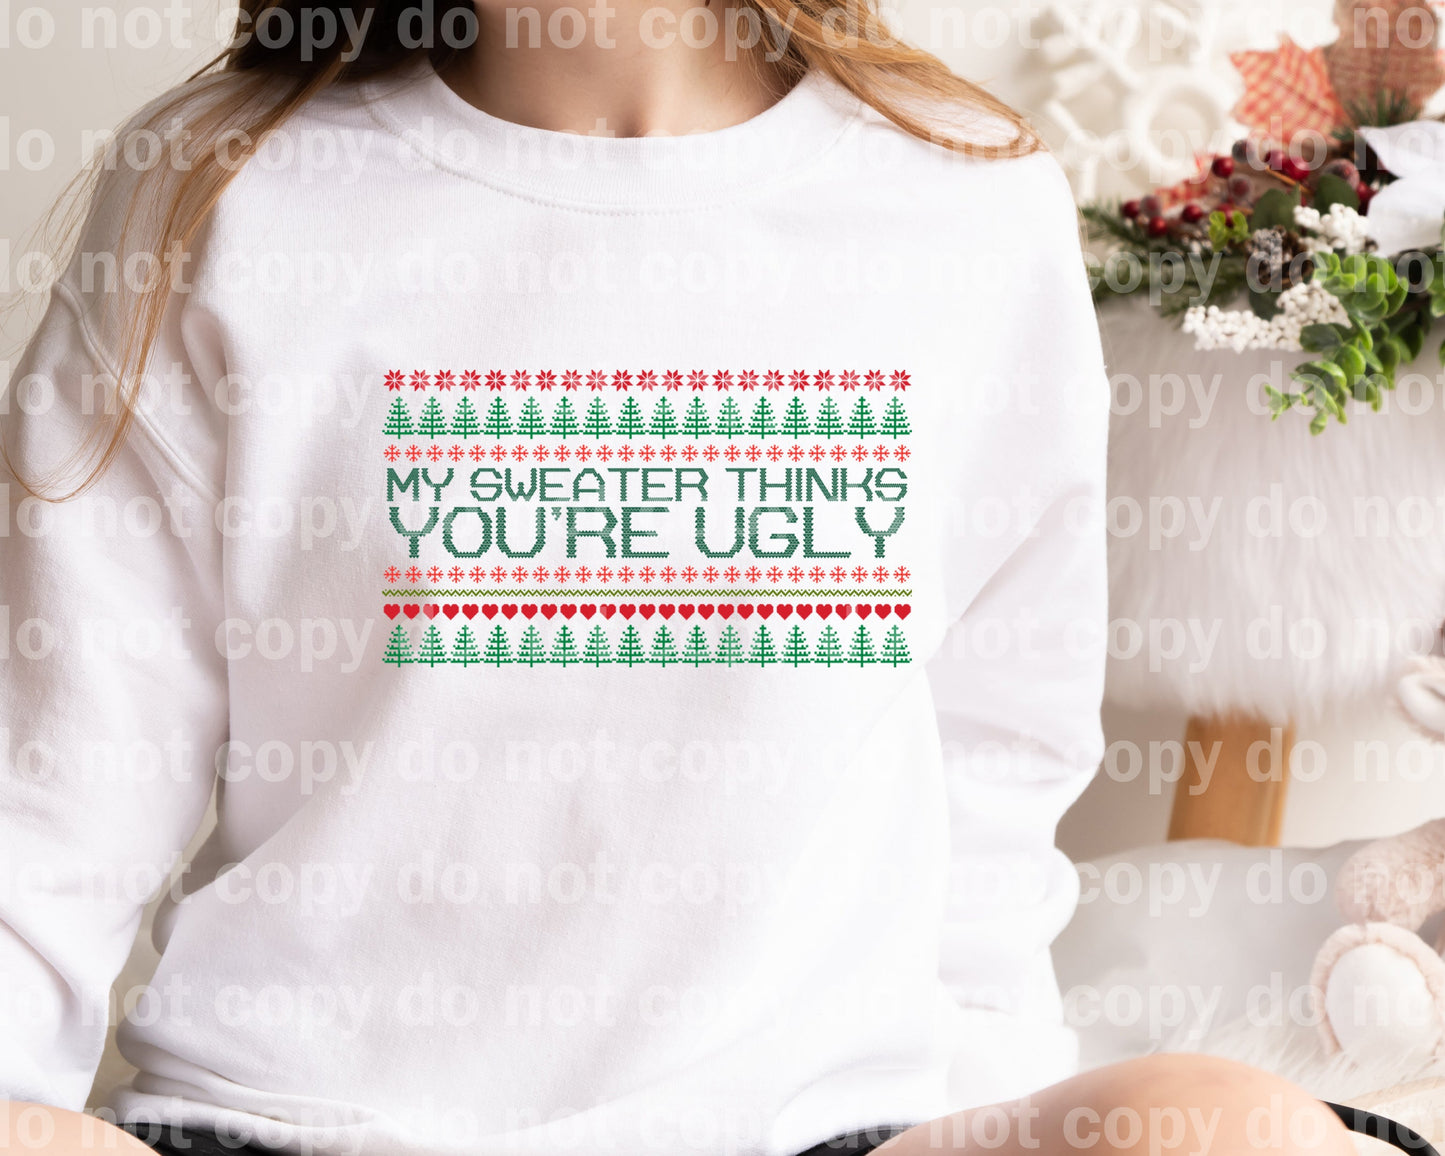 My Sweater Thinks Your Ugly Dream Print or Sublimation Print